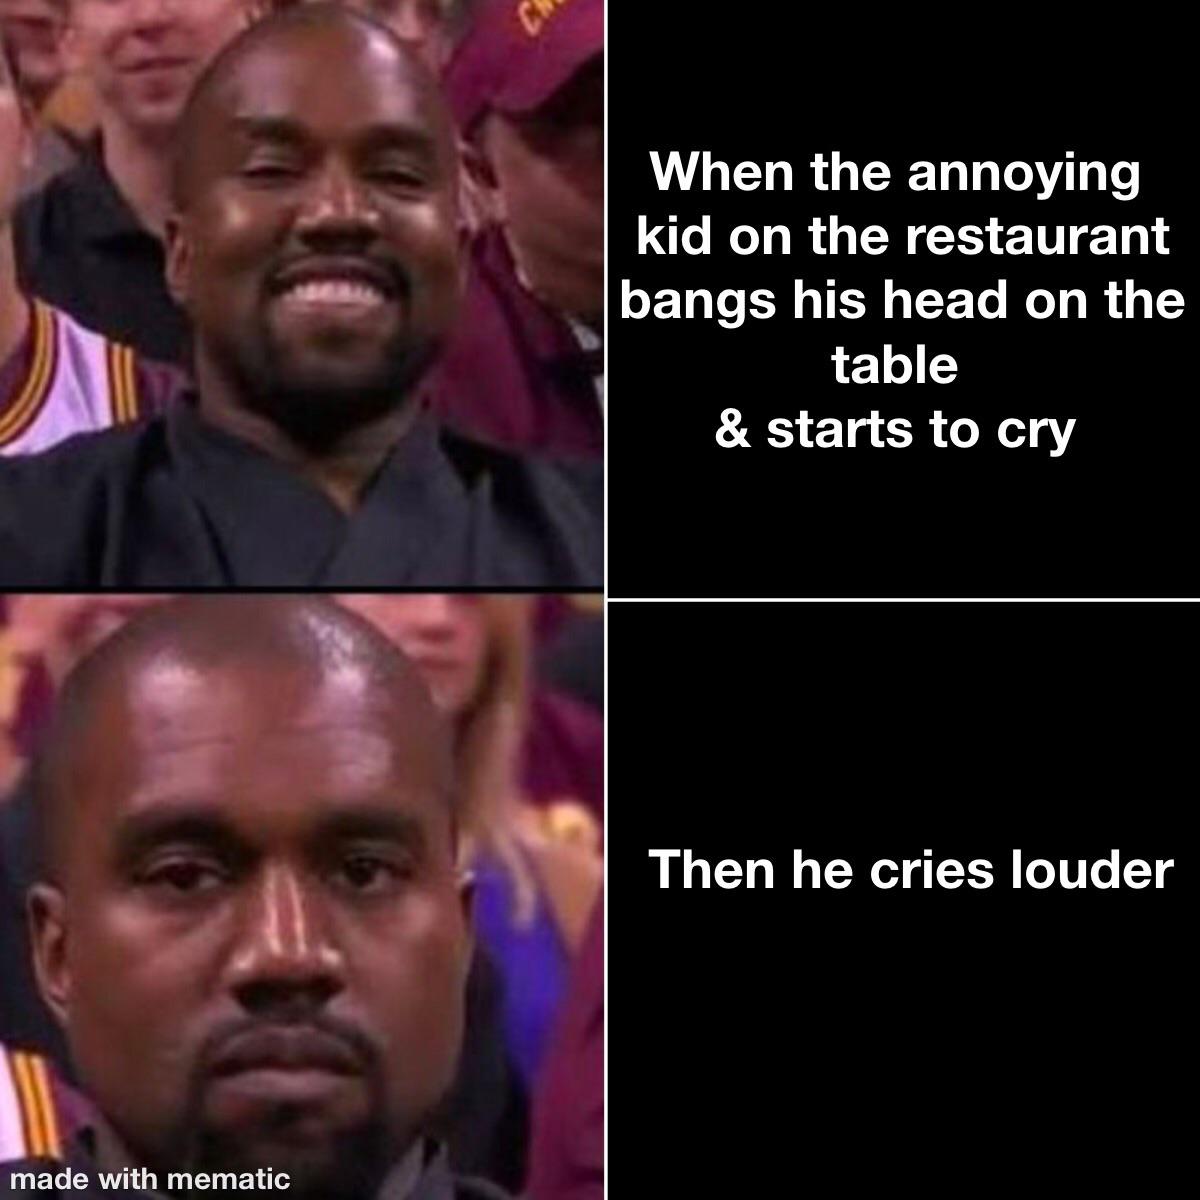 cowash meme - When the annoying kid on the restaurant bangs his head on the table & starts to cry Then he cries louder made with mematic